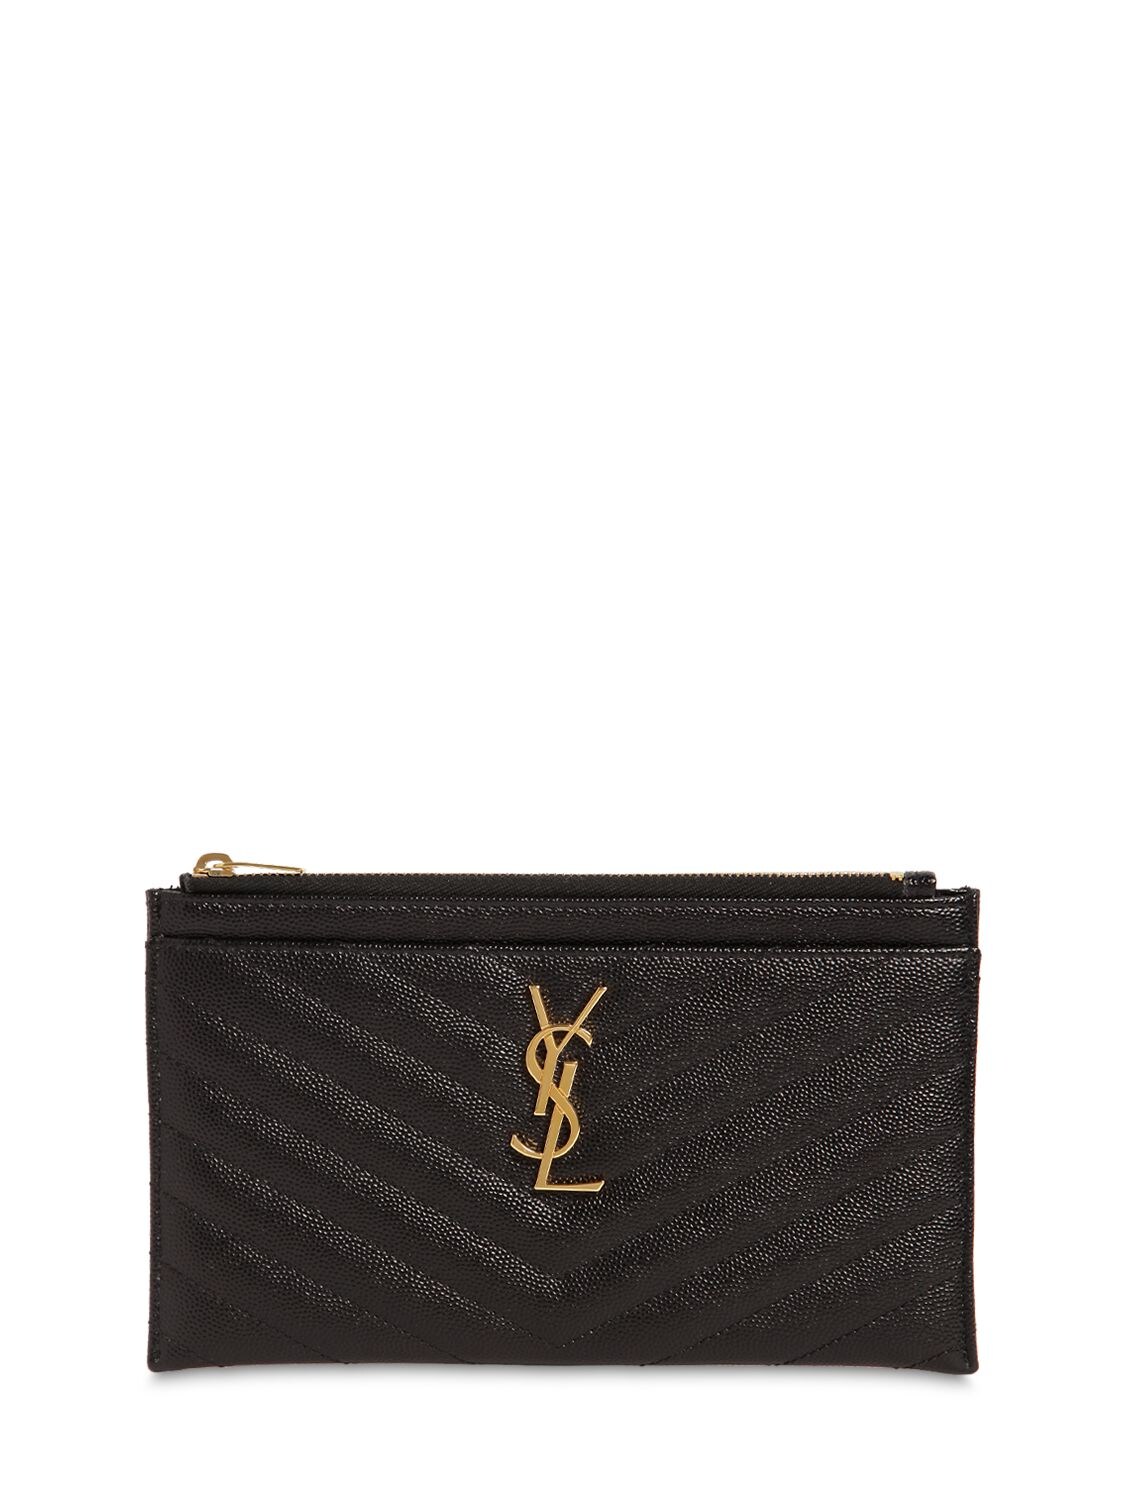 Saint Laurent Small Quilted Leather Clutch In Black